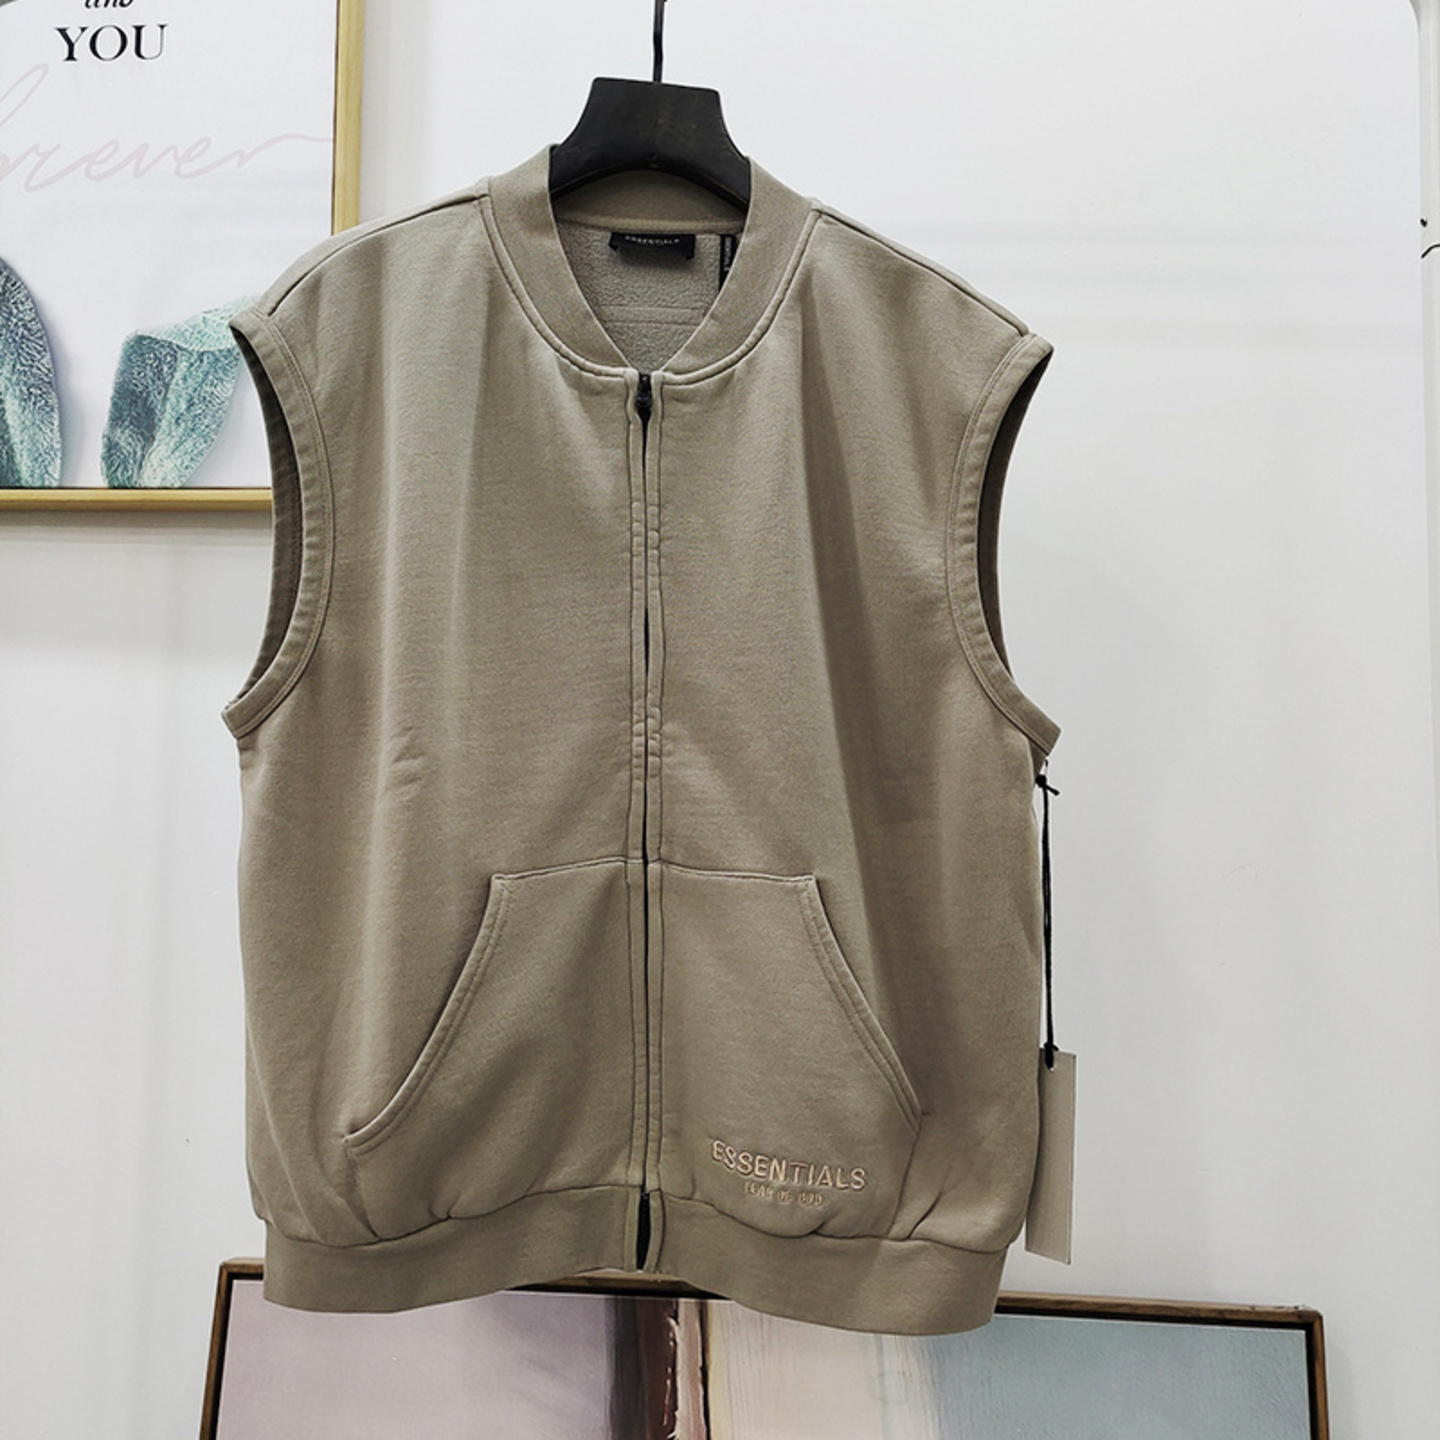 Fear of God Essentials SS20 Vest